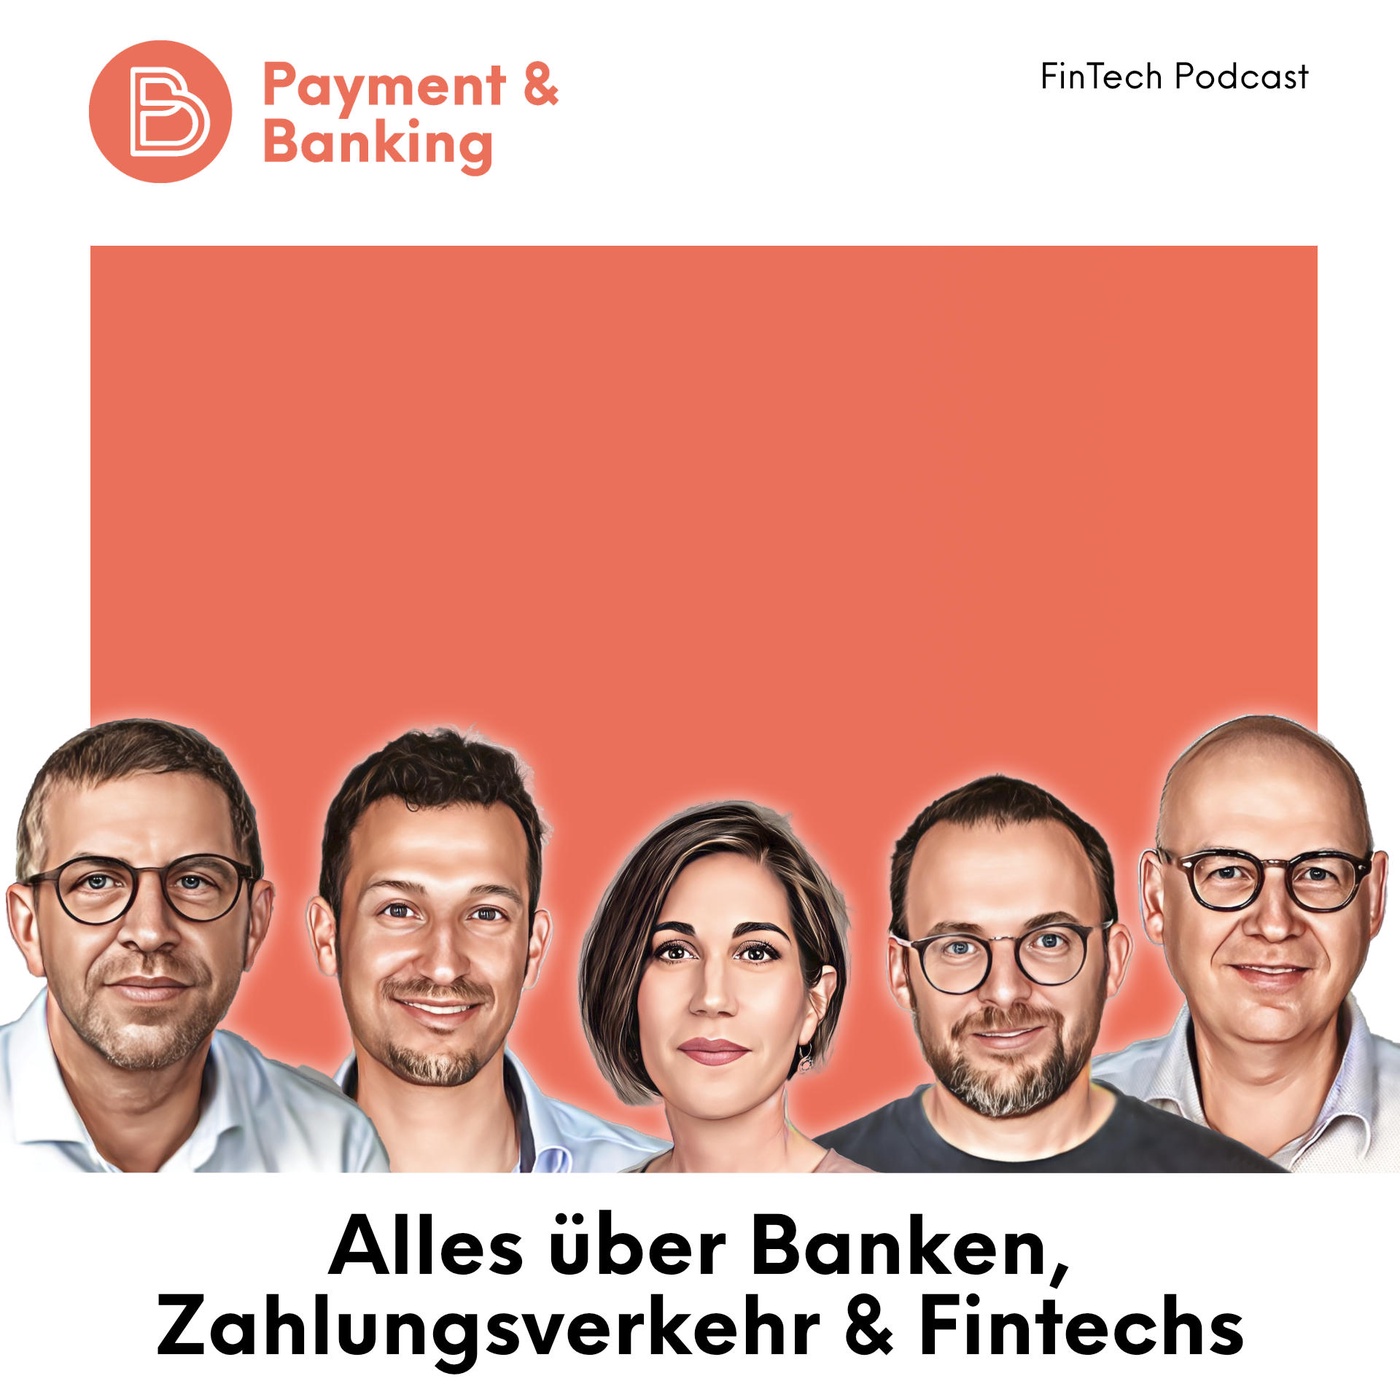 Payment & Banking Fintech Podcast